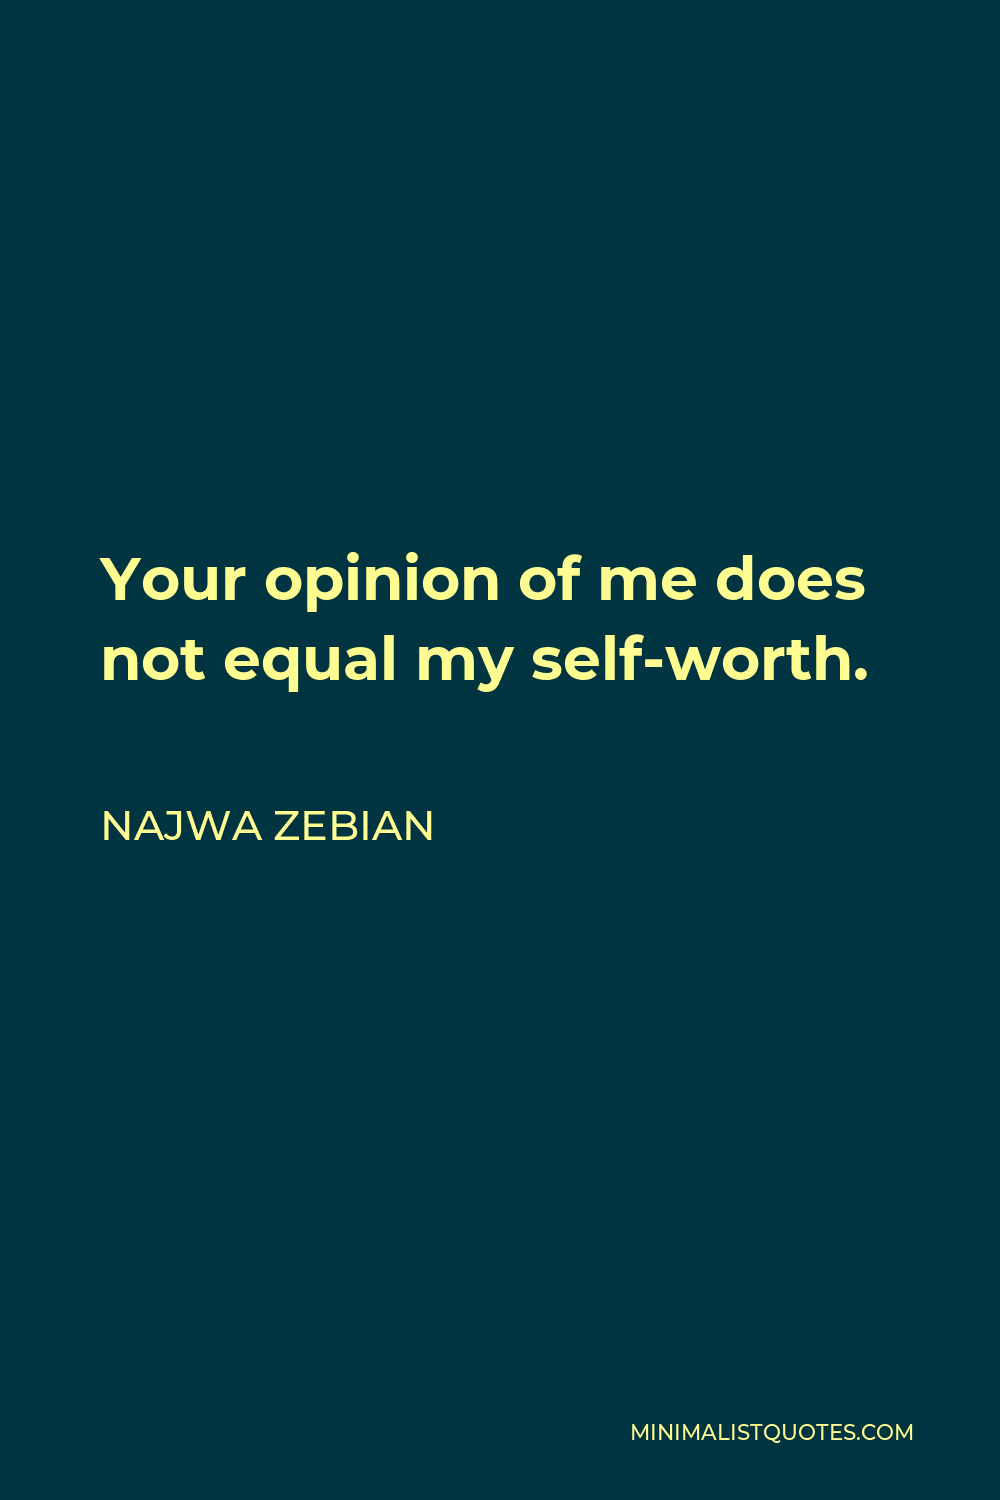 Najwa Zebian Quote - Your opinion of me does not equal my self-worth.